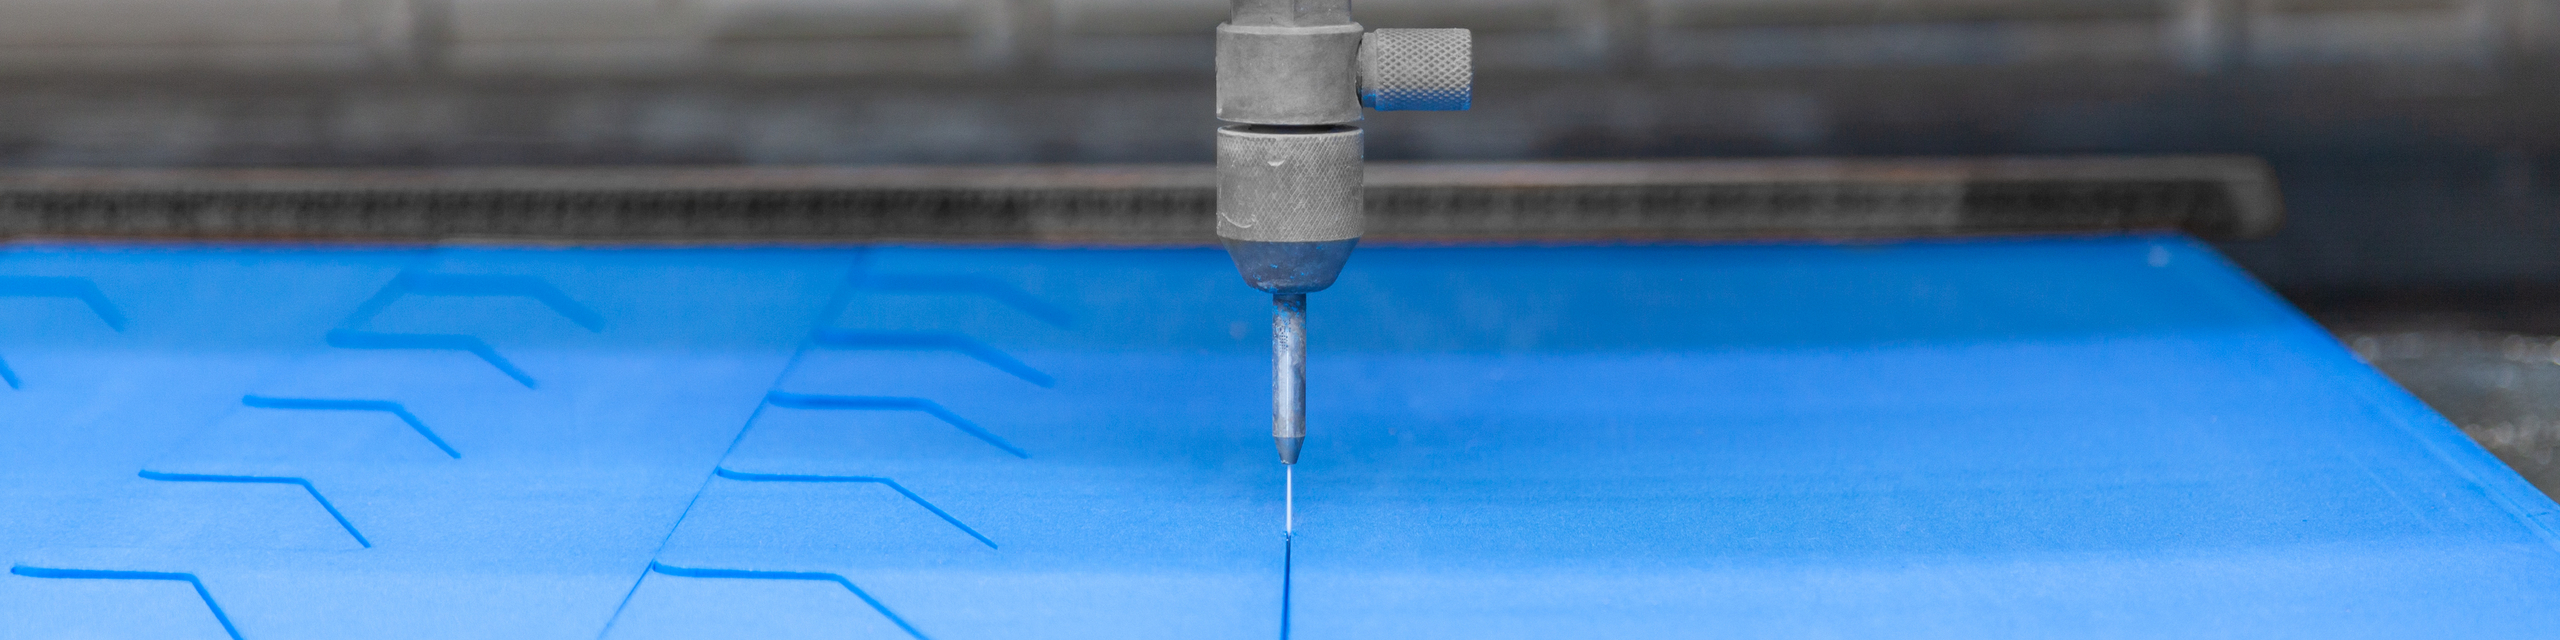 Industrial water jet cutting